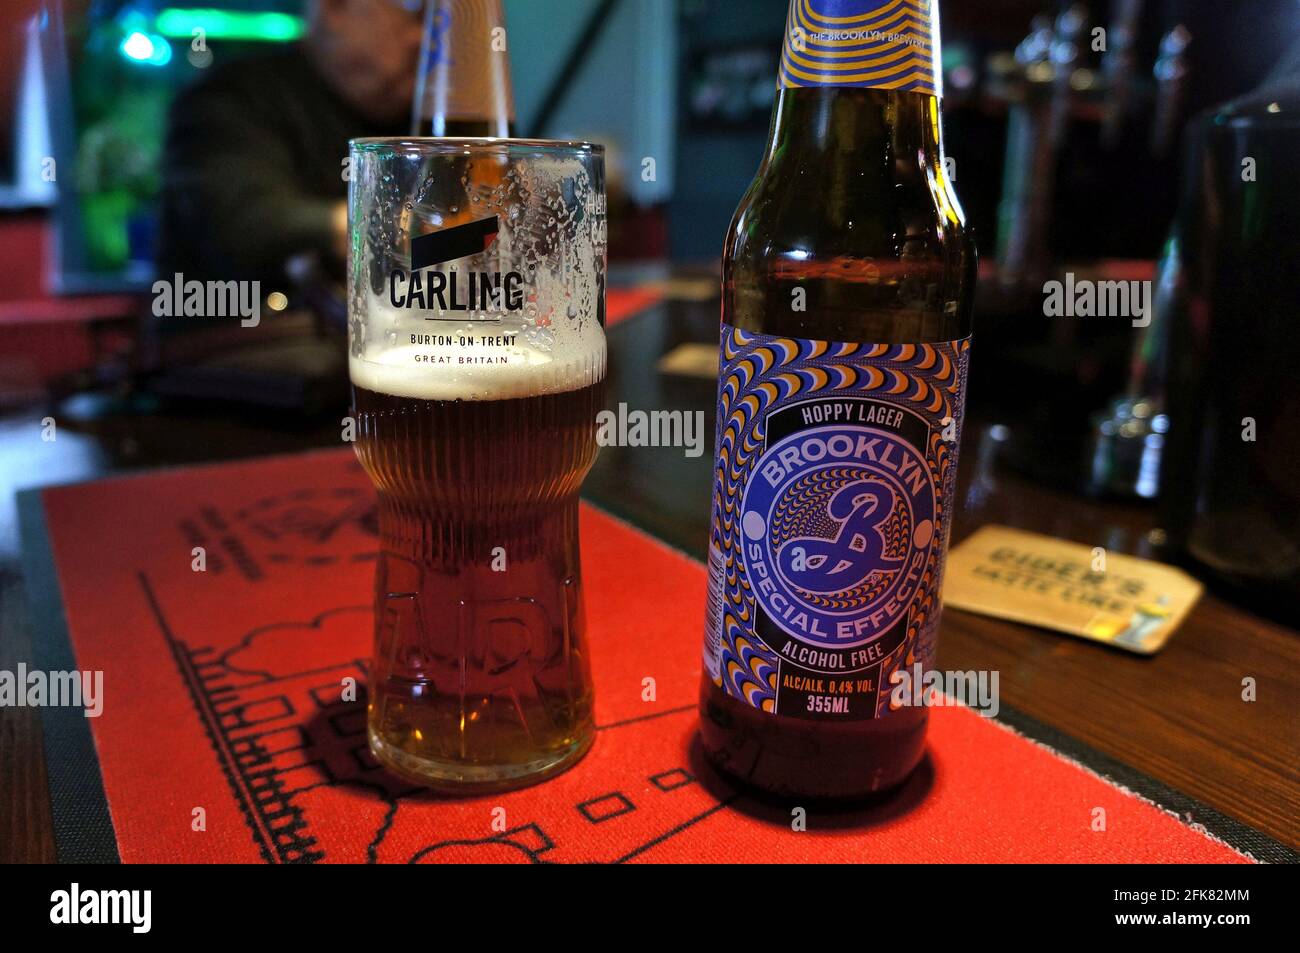 Brooklyn alcohol-free beer bottle and pint glass at the bar on a soft-focused background Stock Photo